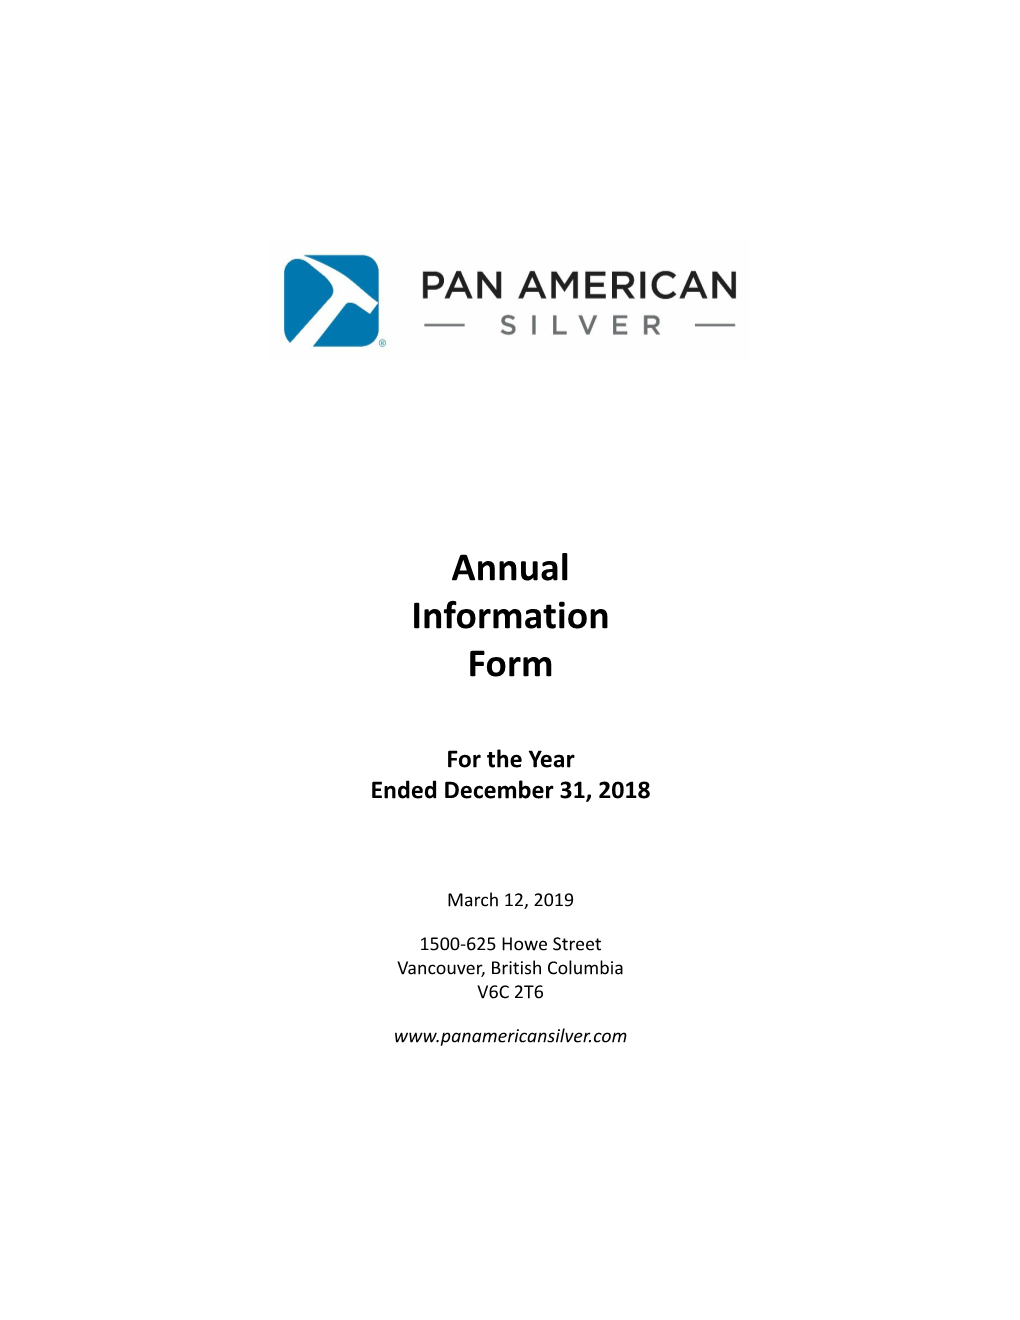 2018 Annual Information Form